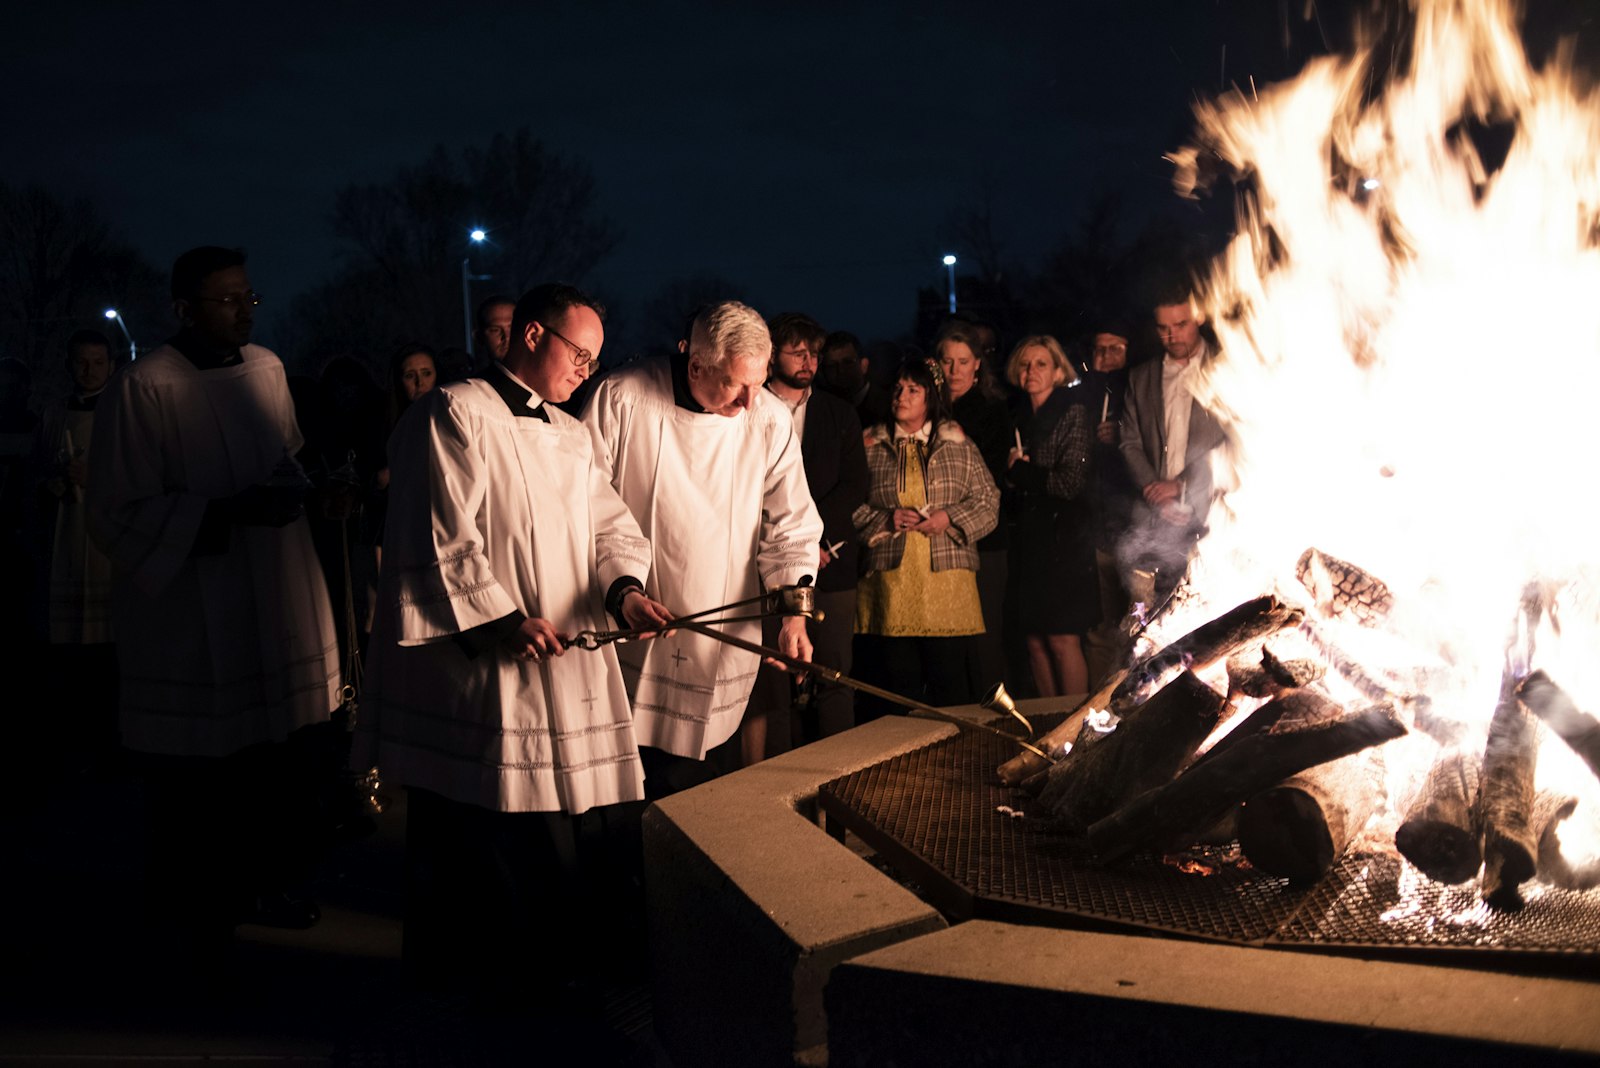 Seminarians Richard Dorsch Jr., left, and Patrick Bruen tend to the Easter fire in the plaza of the Cathedral of the Most Blessed Sacrament before Mass begins.